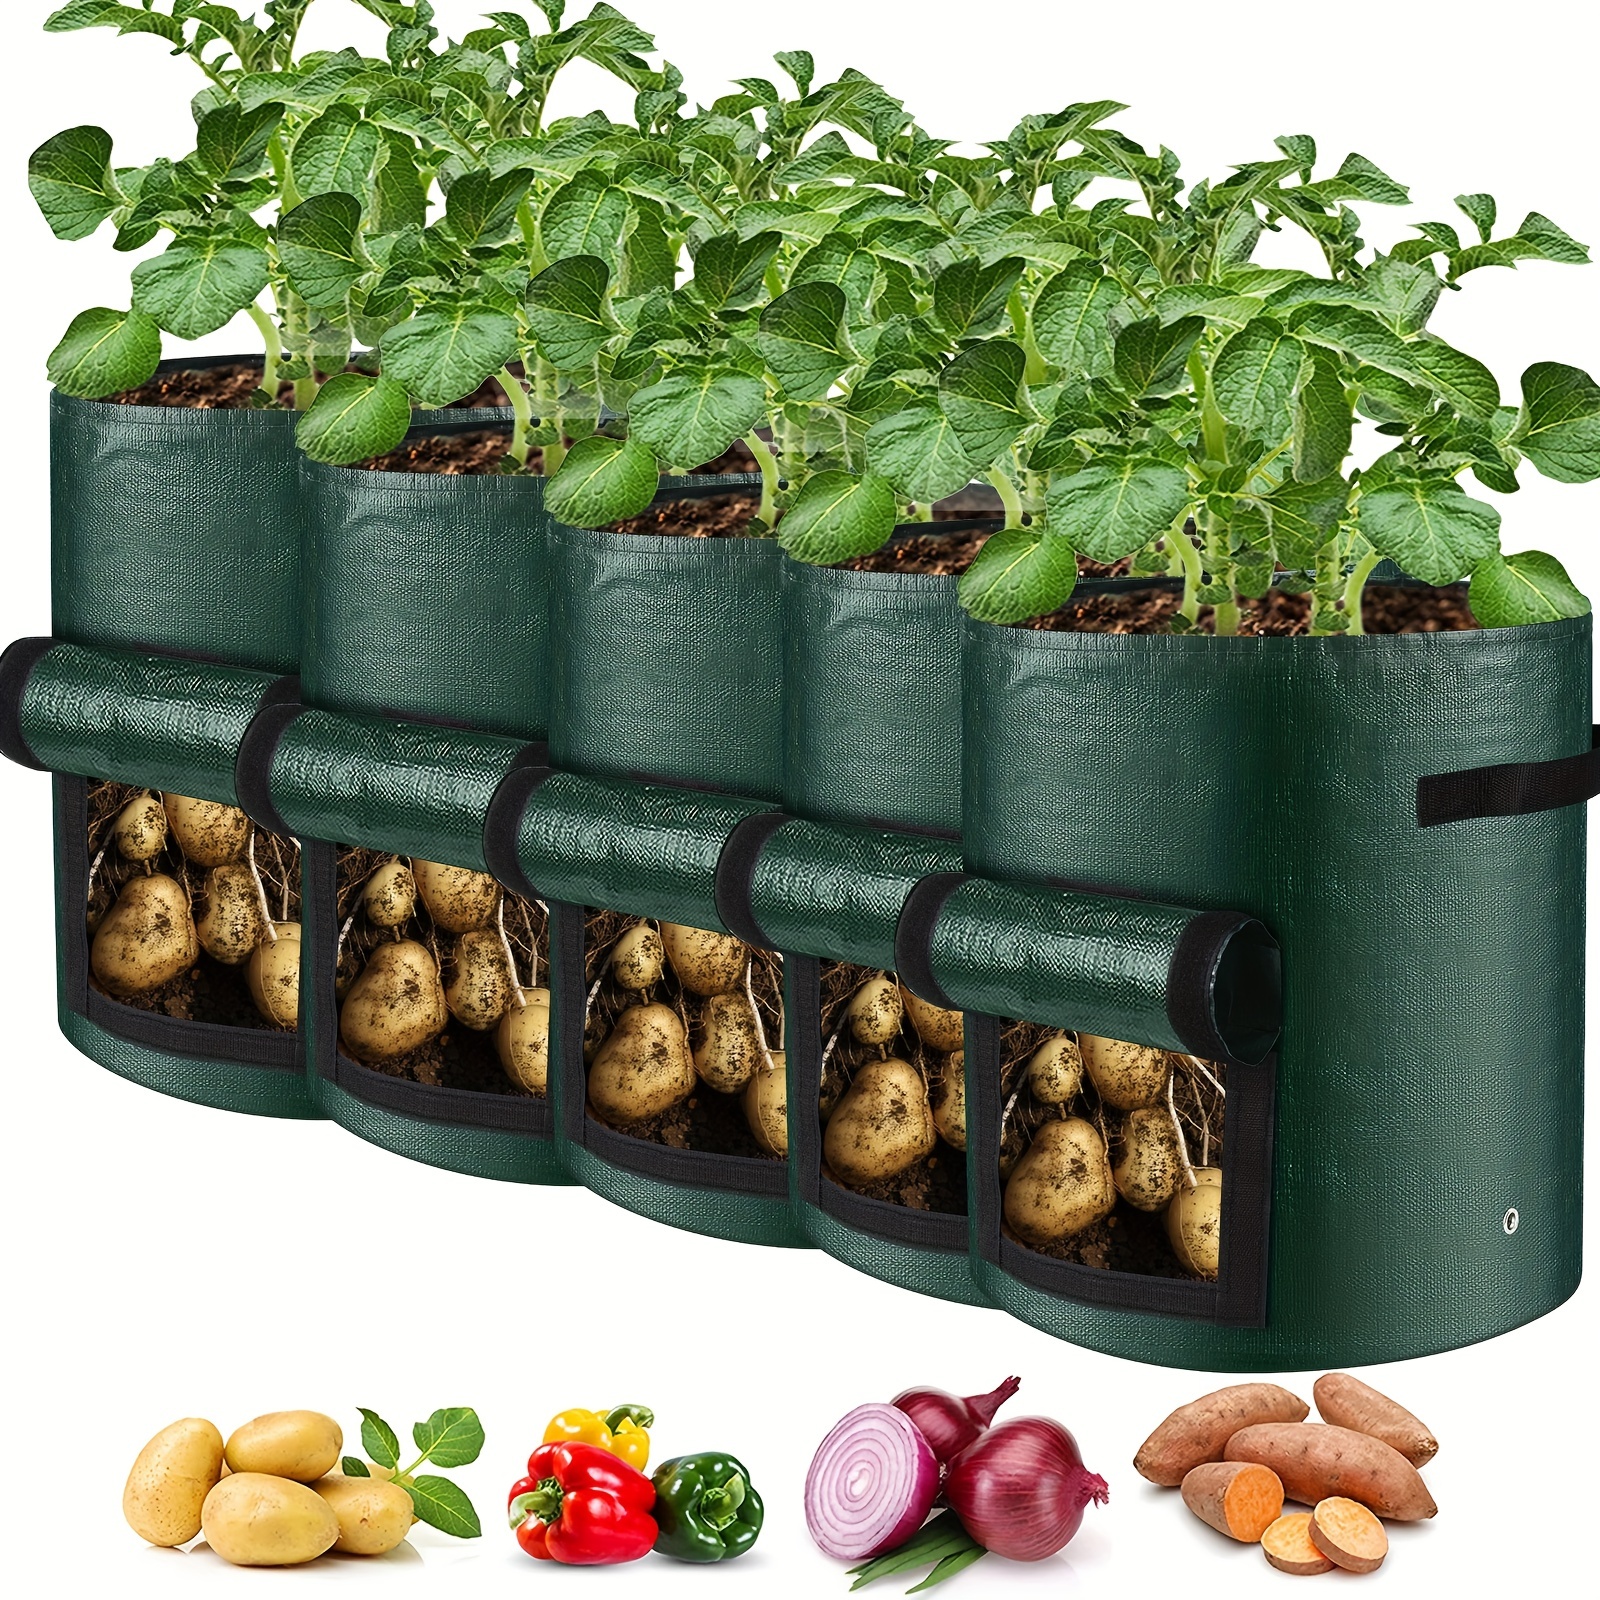 

Grow Your Own Potatoes, Tomatoes, And Vegetables With These 5 Durable Planting Bags!